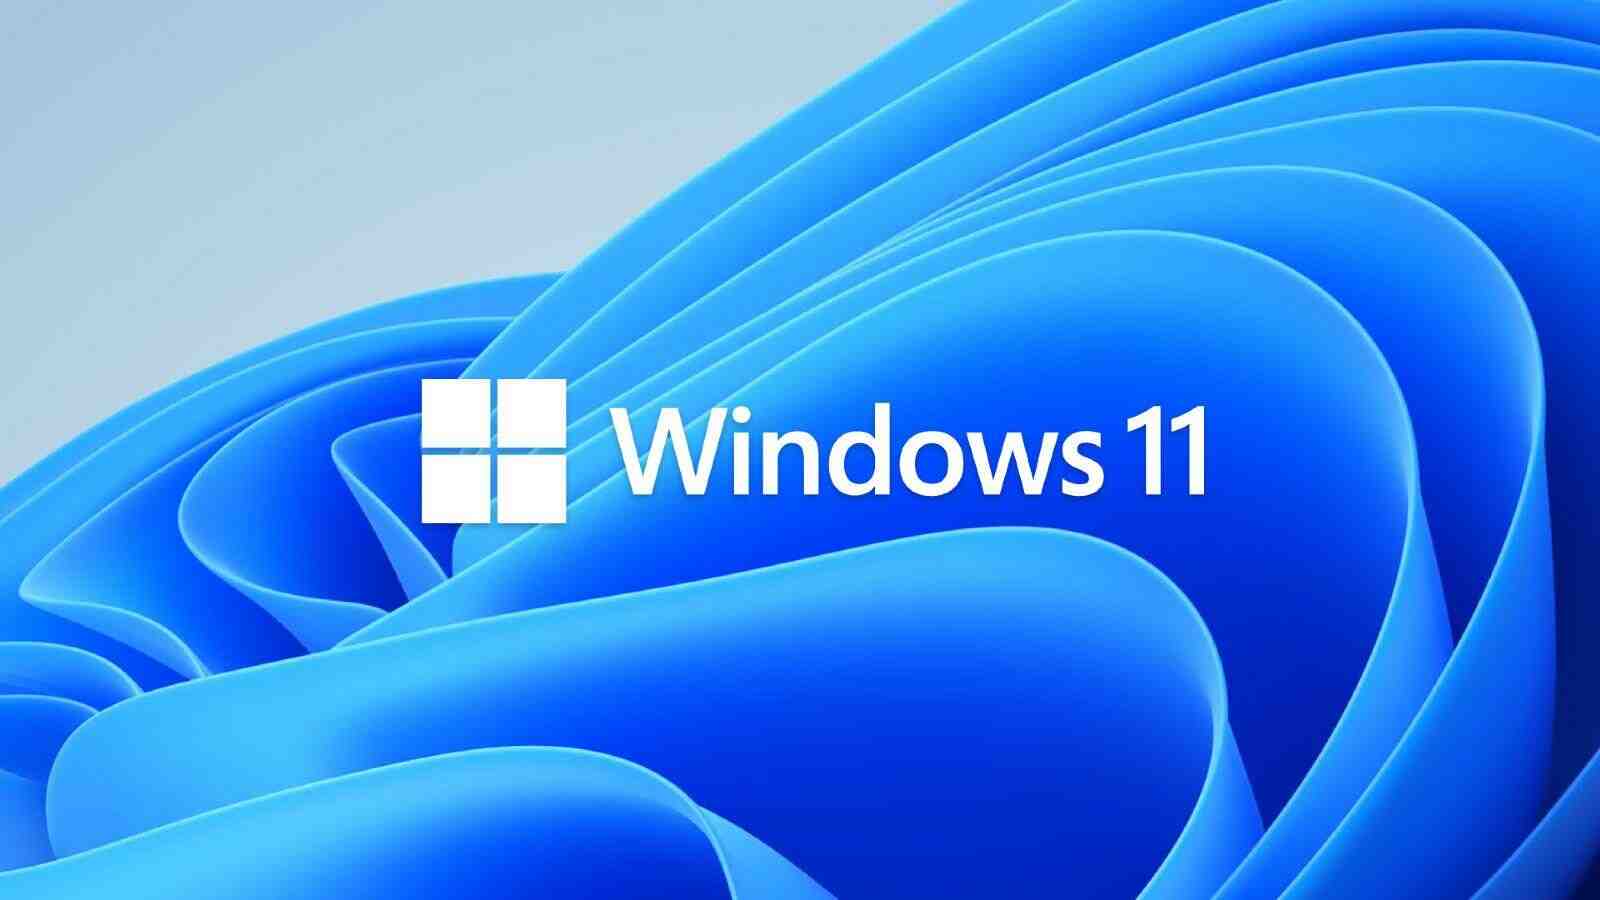 How can I get Windows 11 for free?